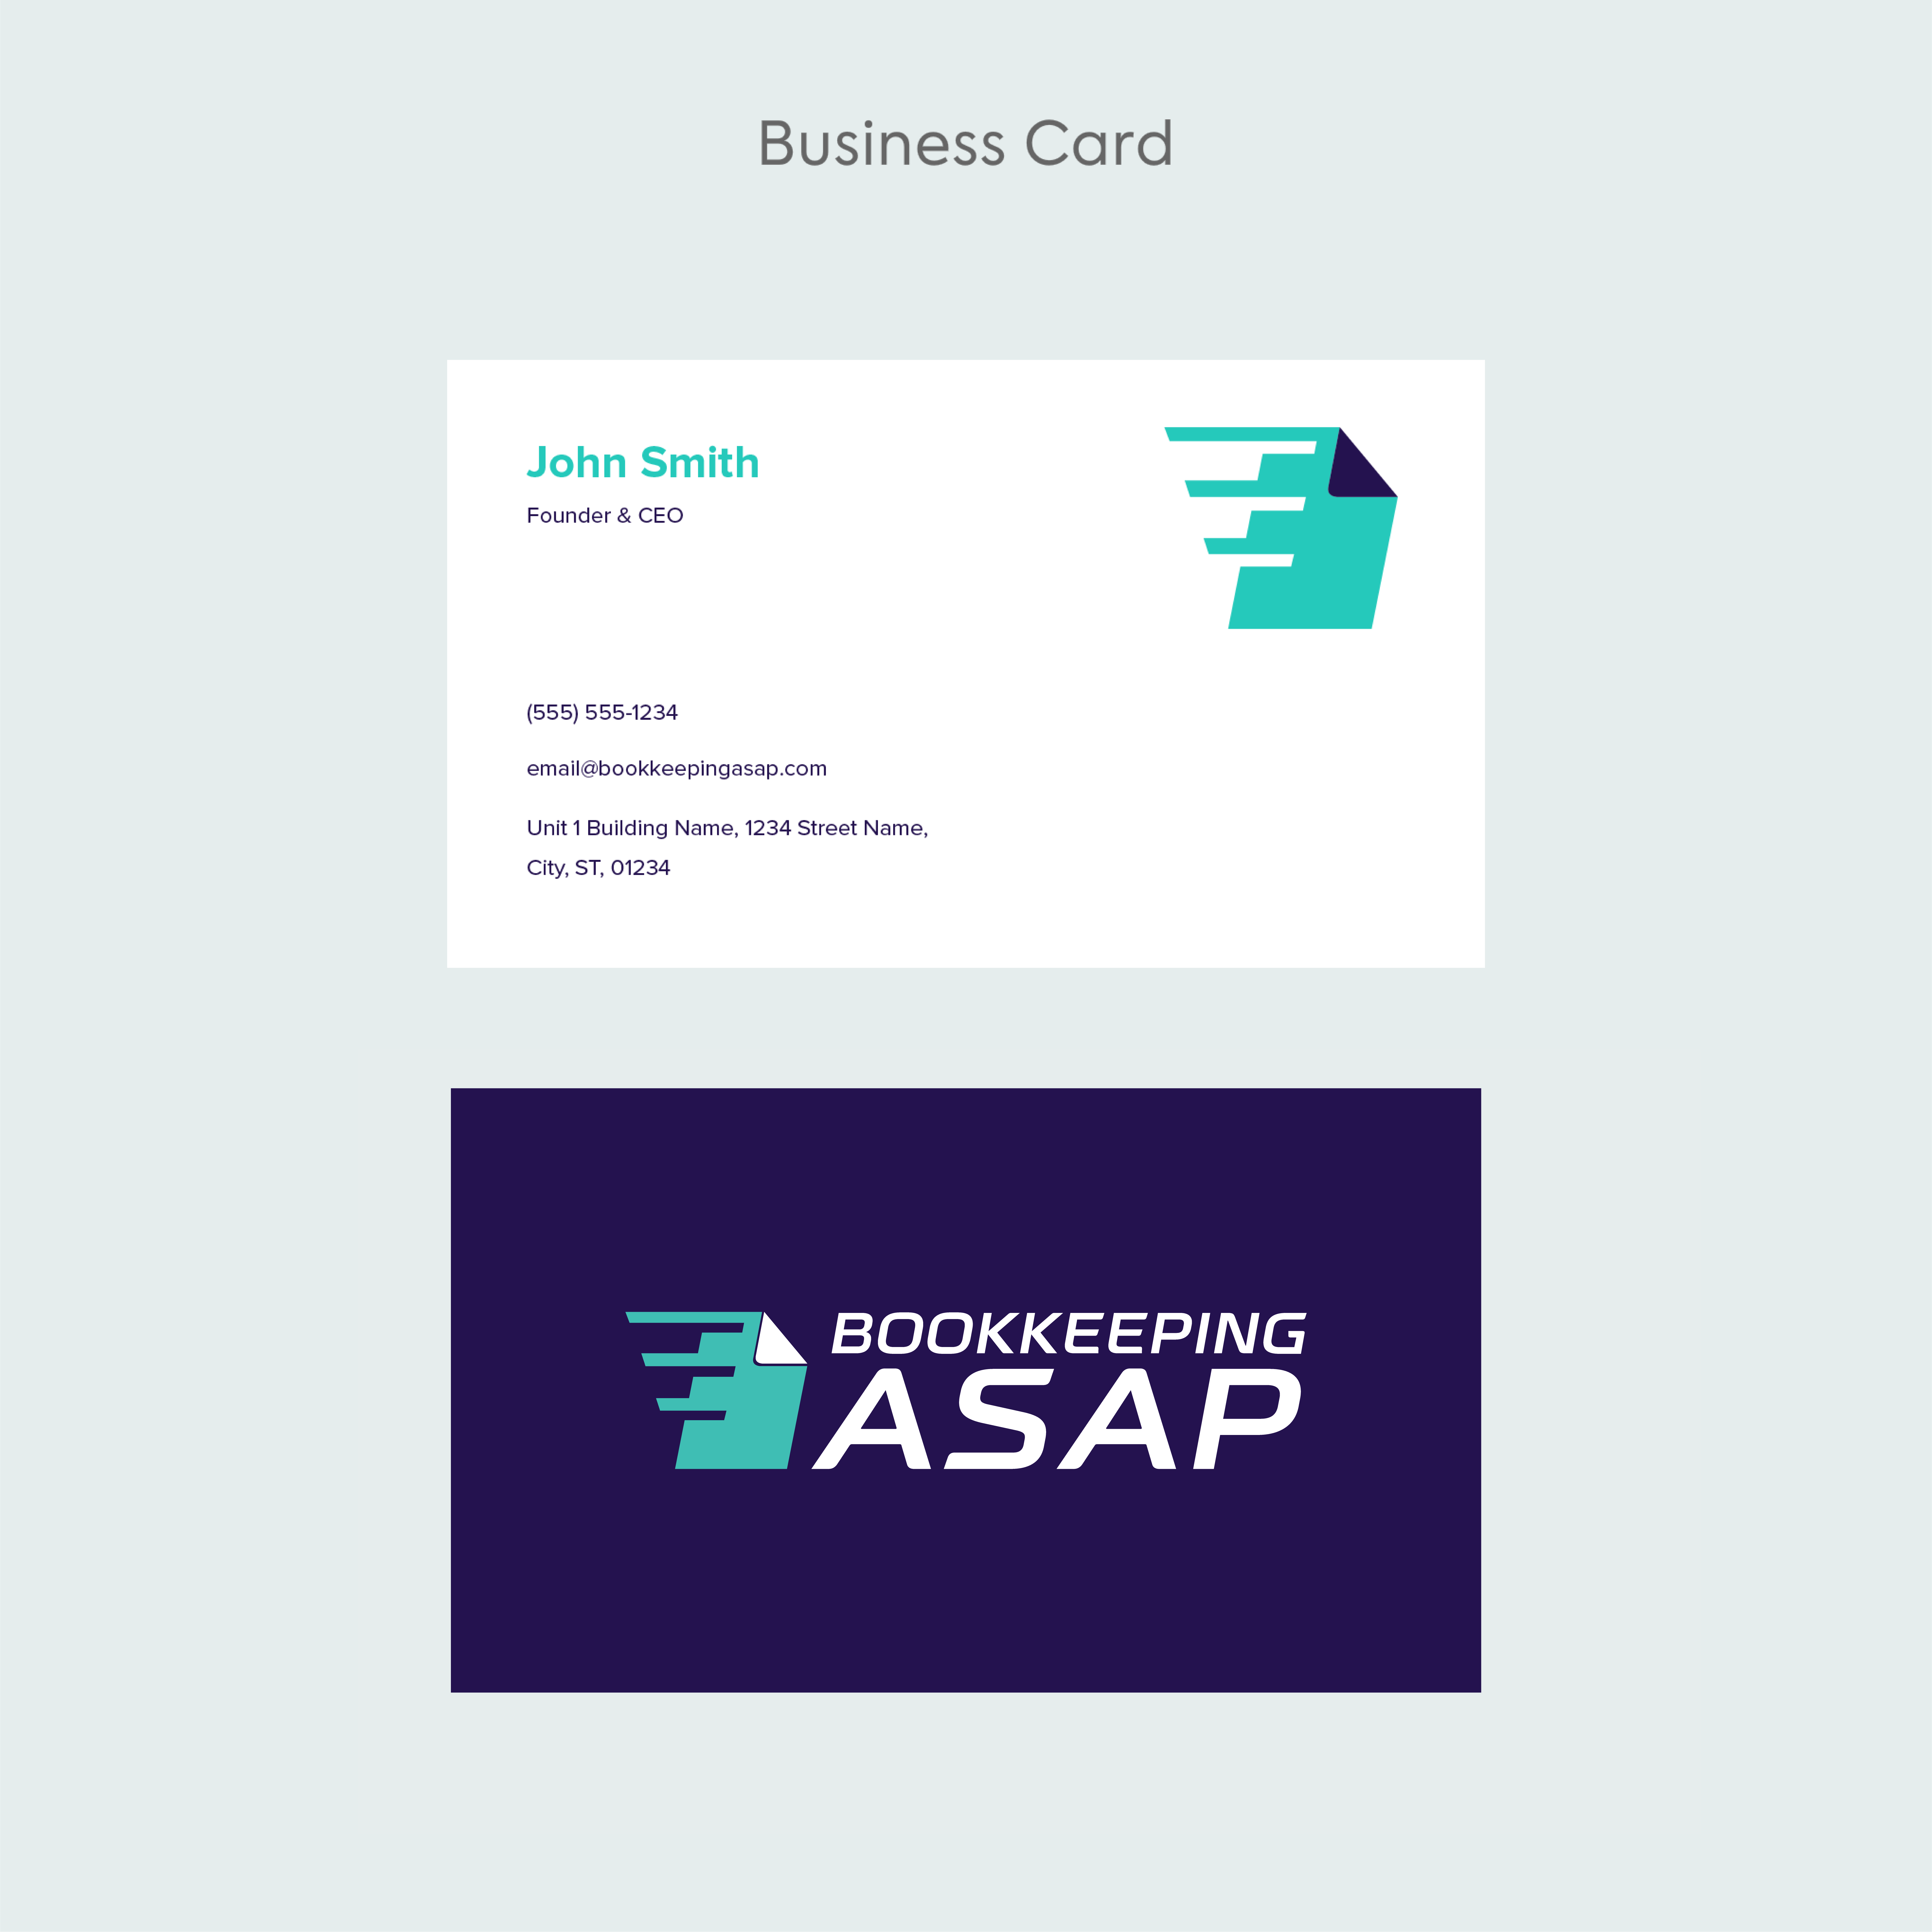 04 - Business Card